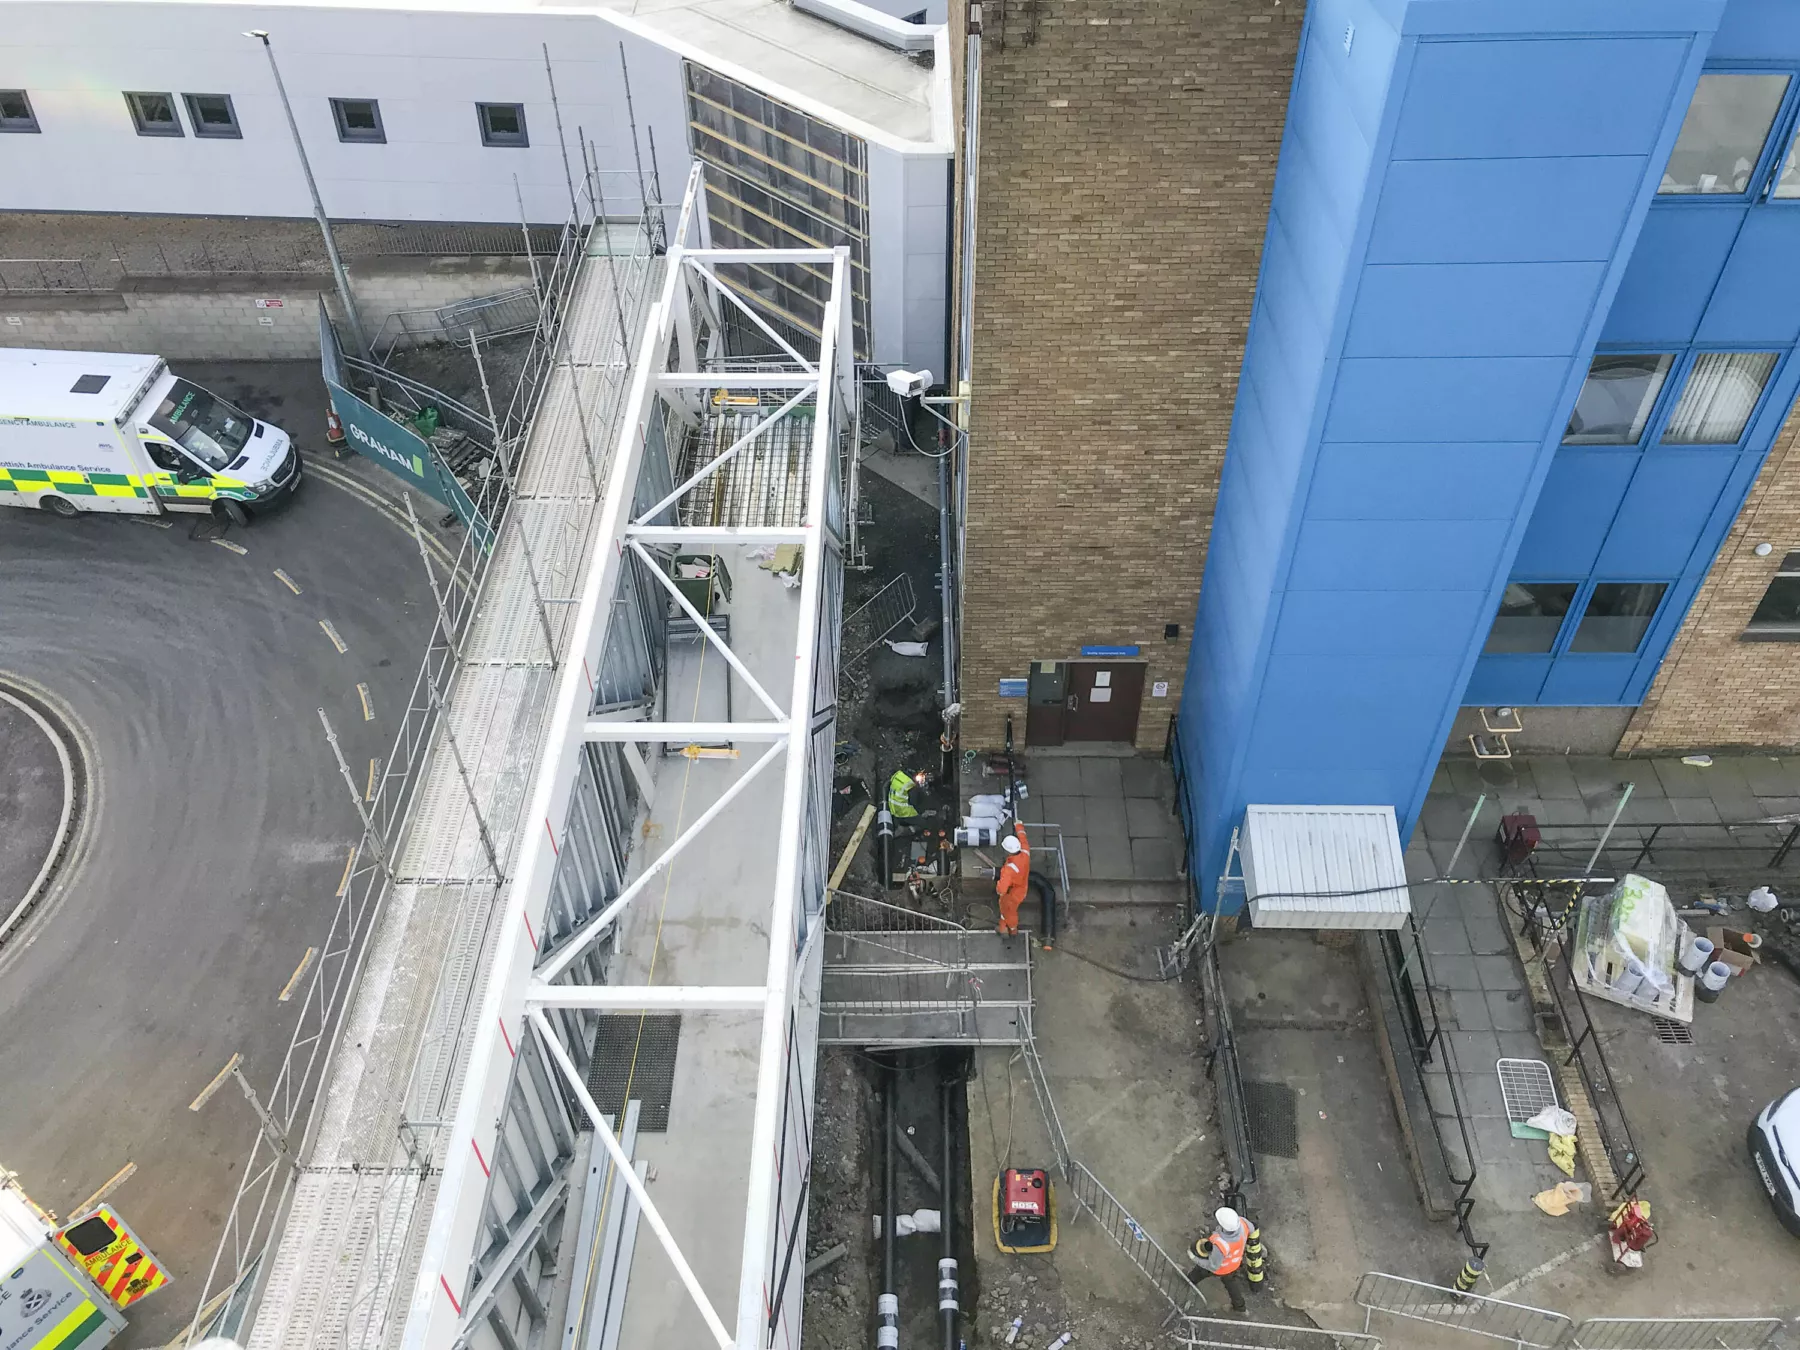 Aerial view showing bridge link being put in place at the National Treatment Centre - Fife Orthopaedics. Behind the link, contstruction workers are wearing orange hi vis clothing. On the other side, ambulances are parked.